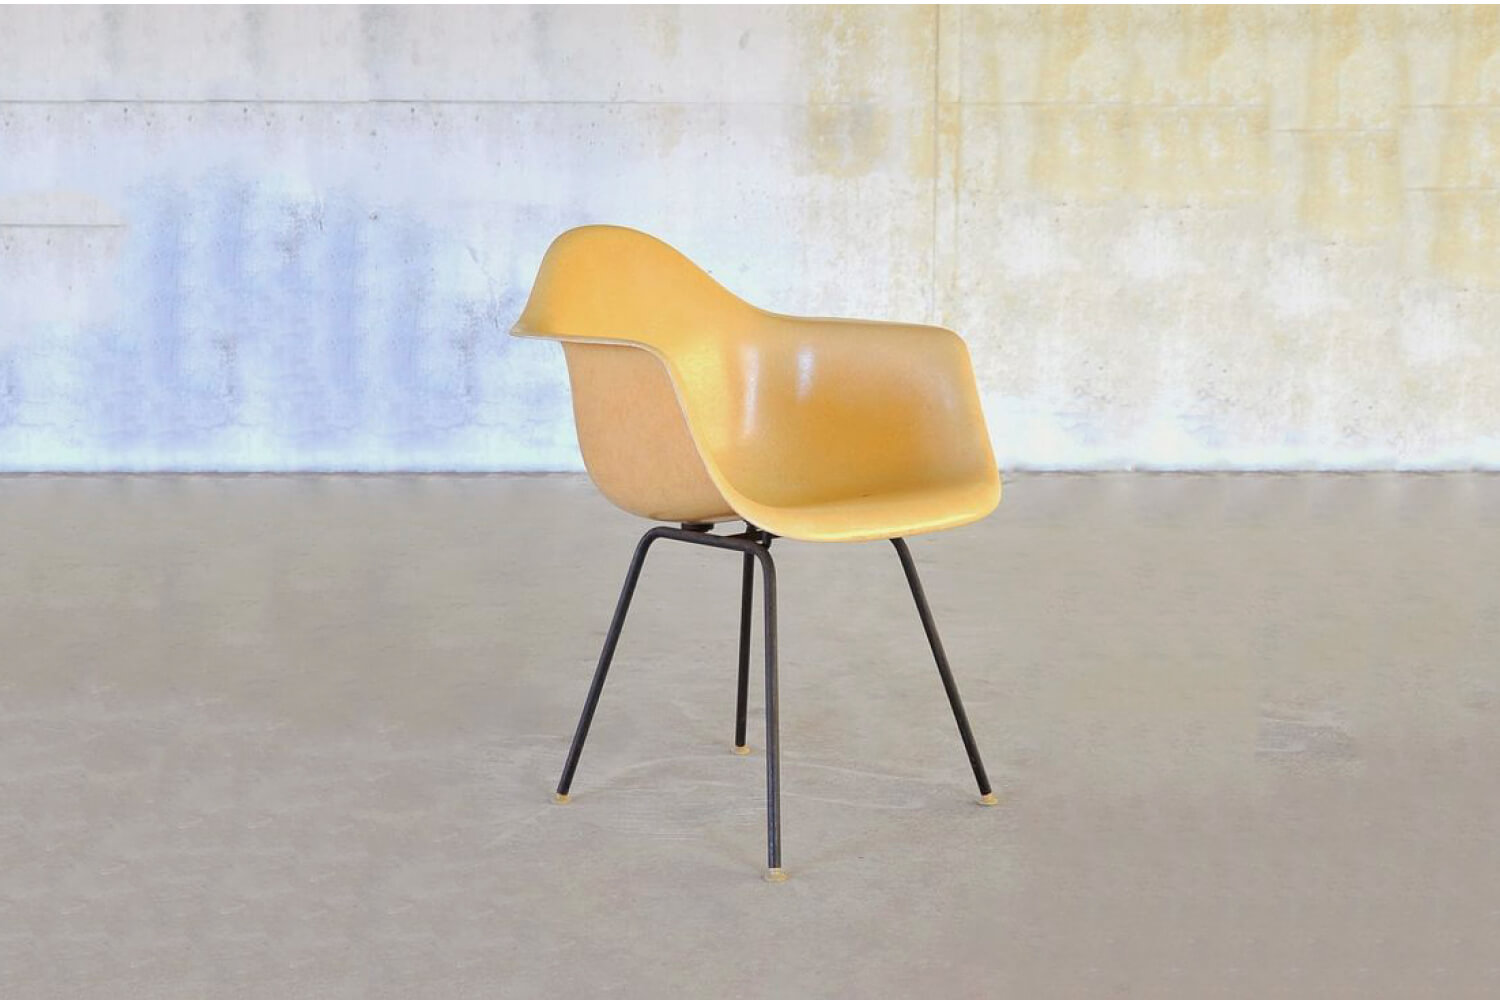 The legendary designer piece by the Eames couple. 